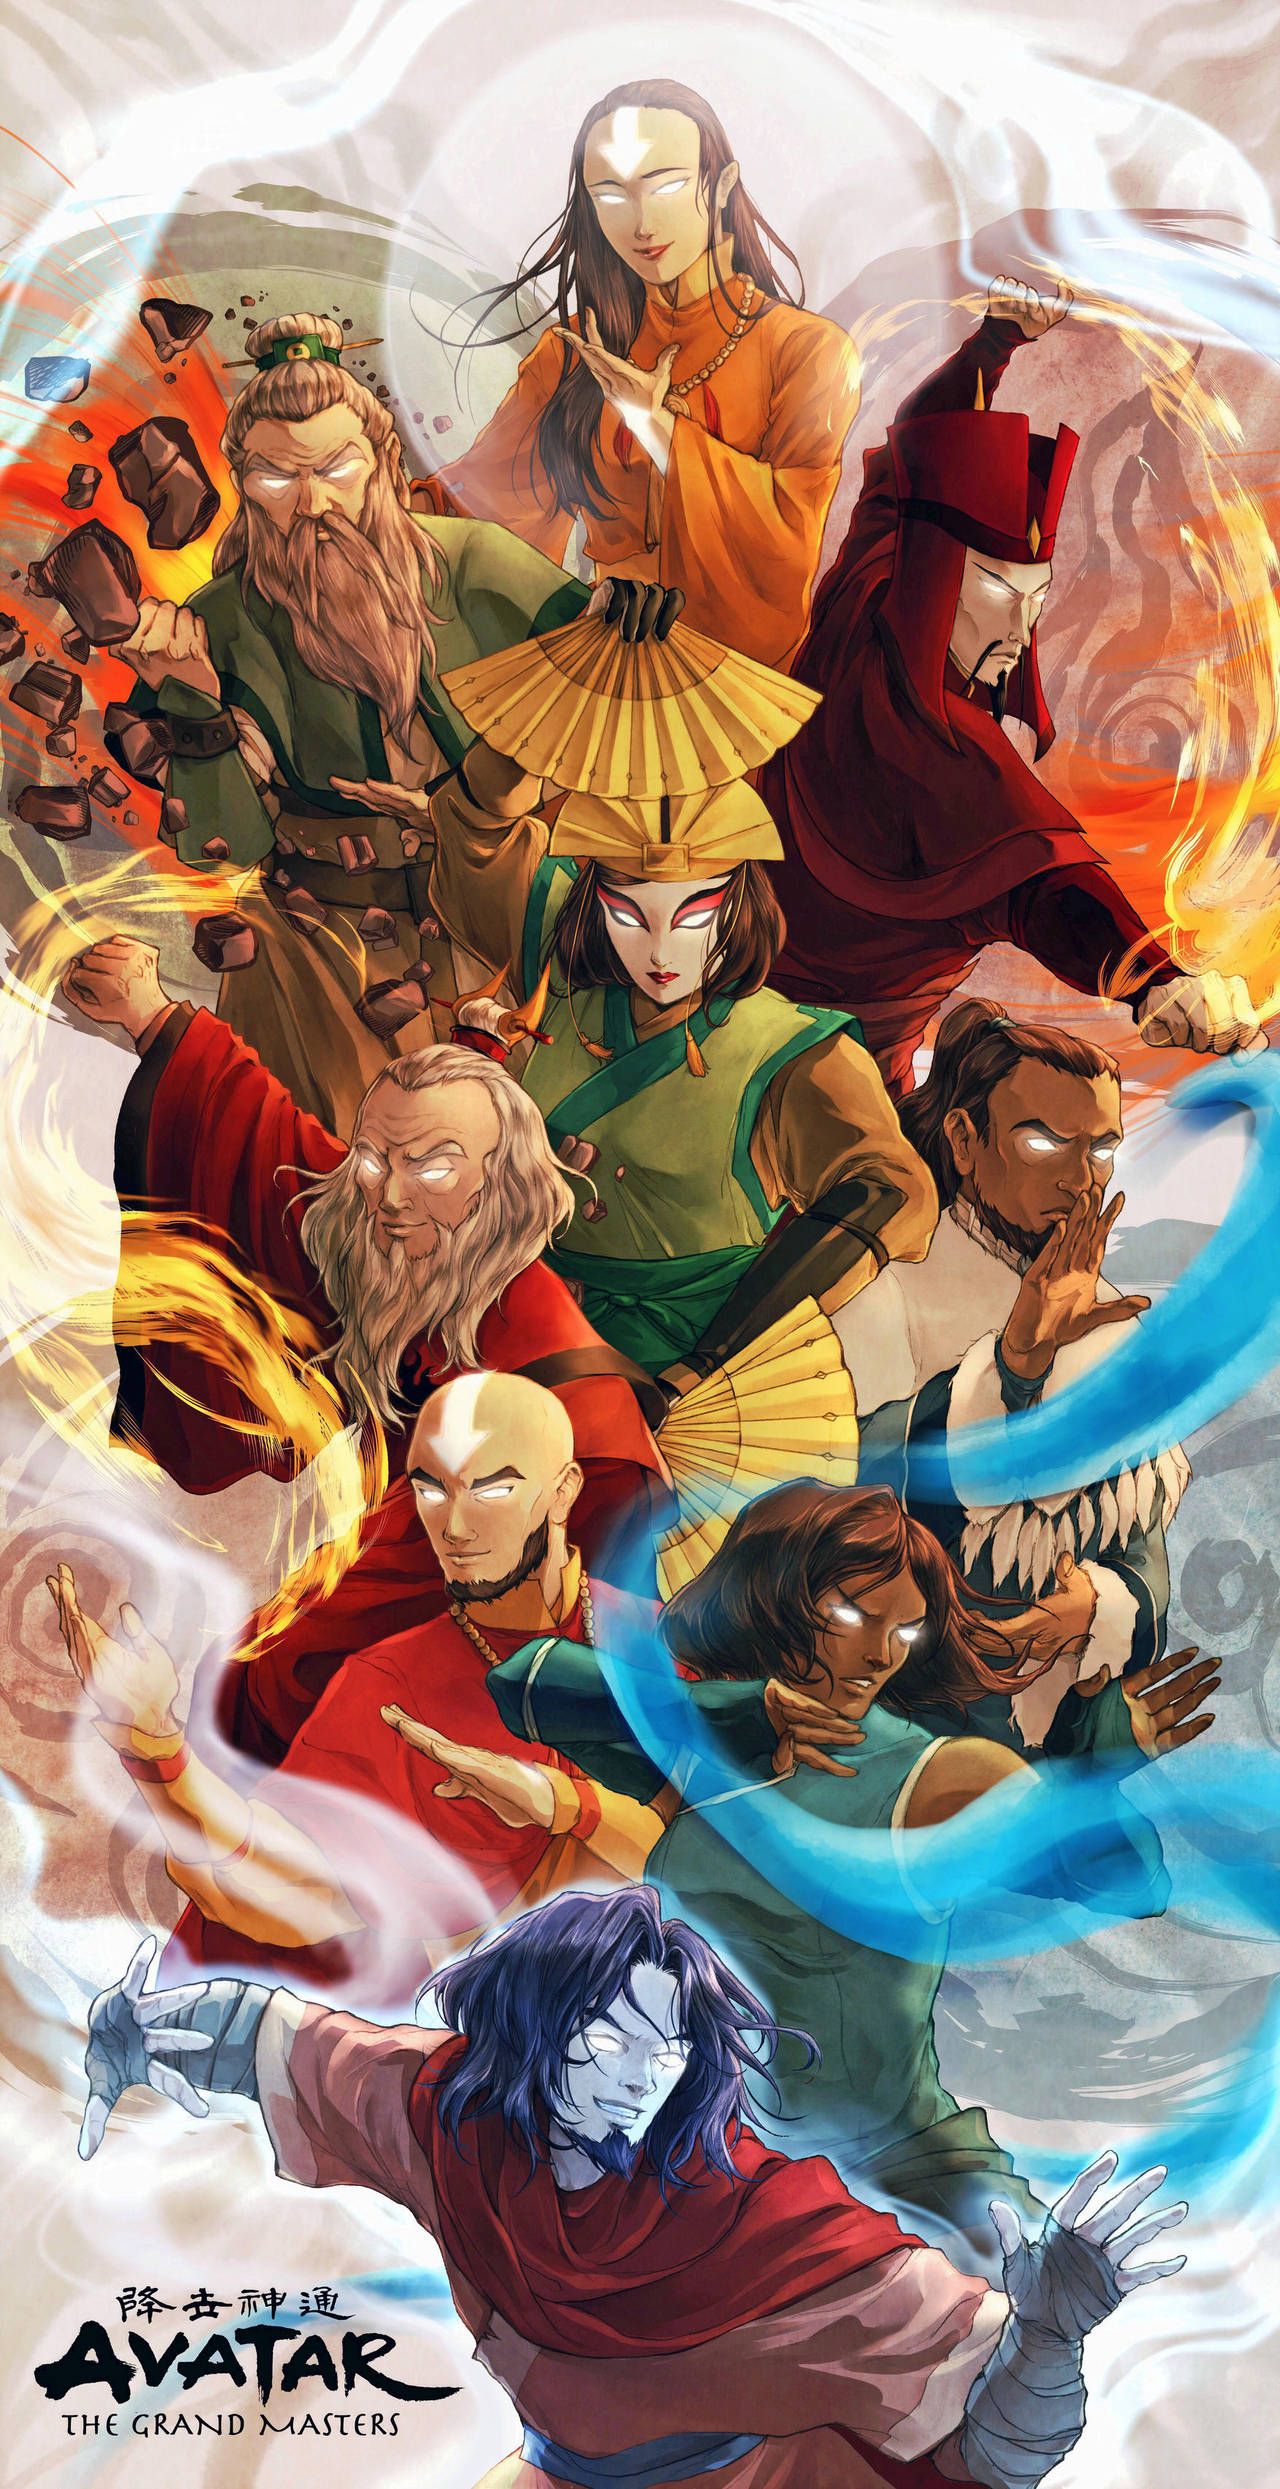 Kyoshi: The Last Airbender Anime Image Board